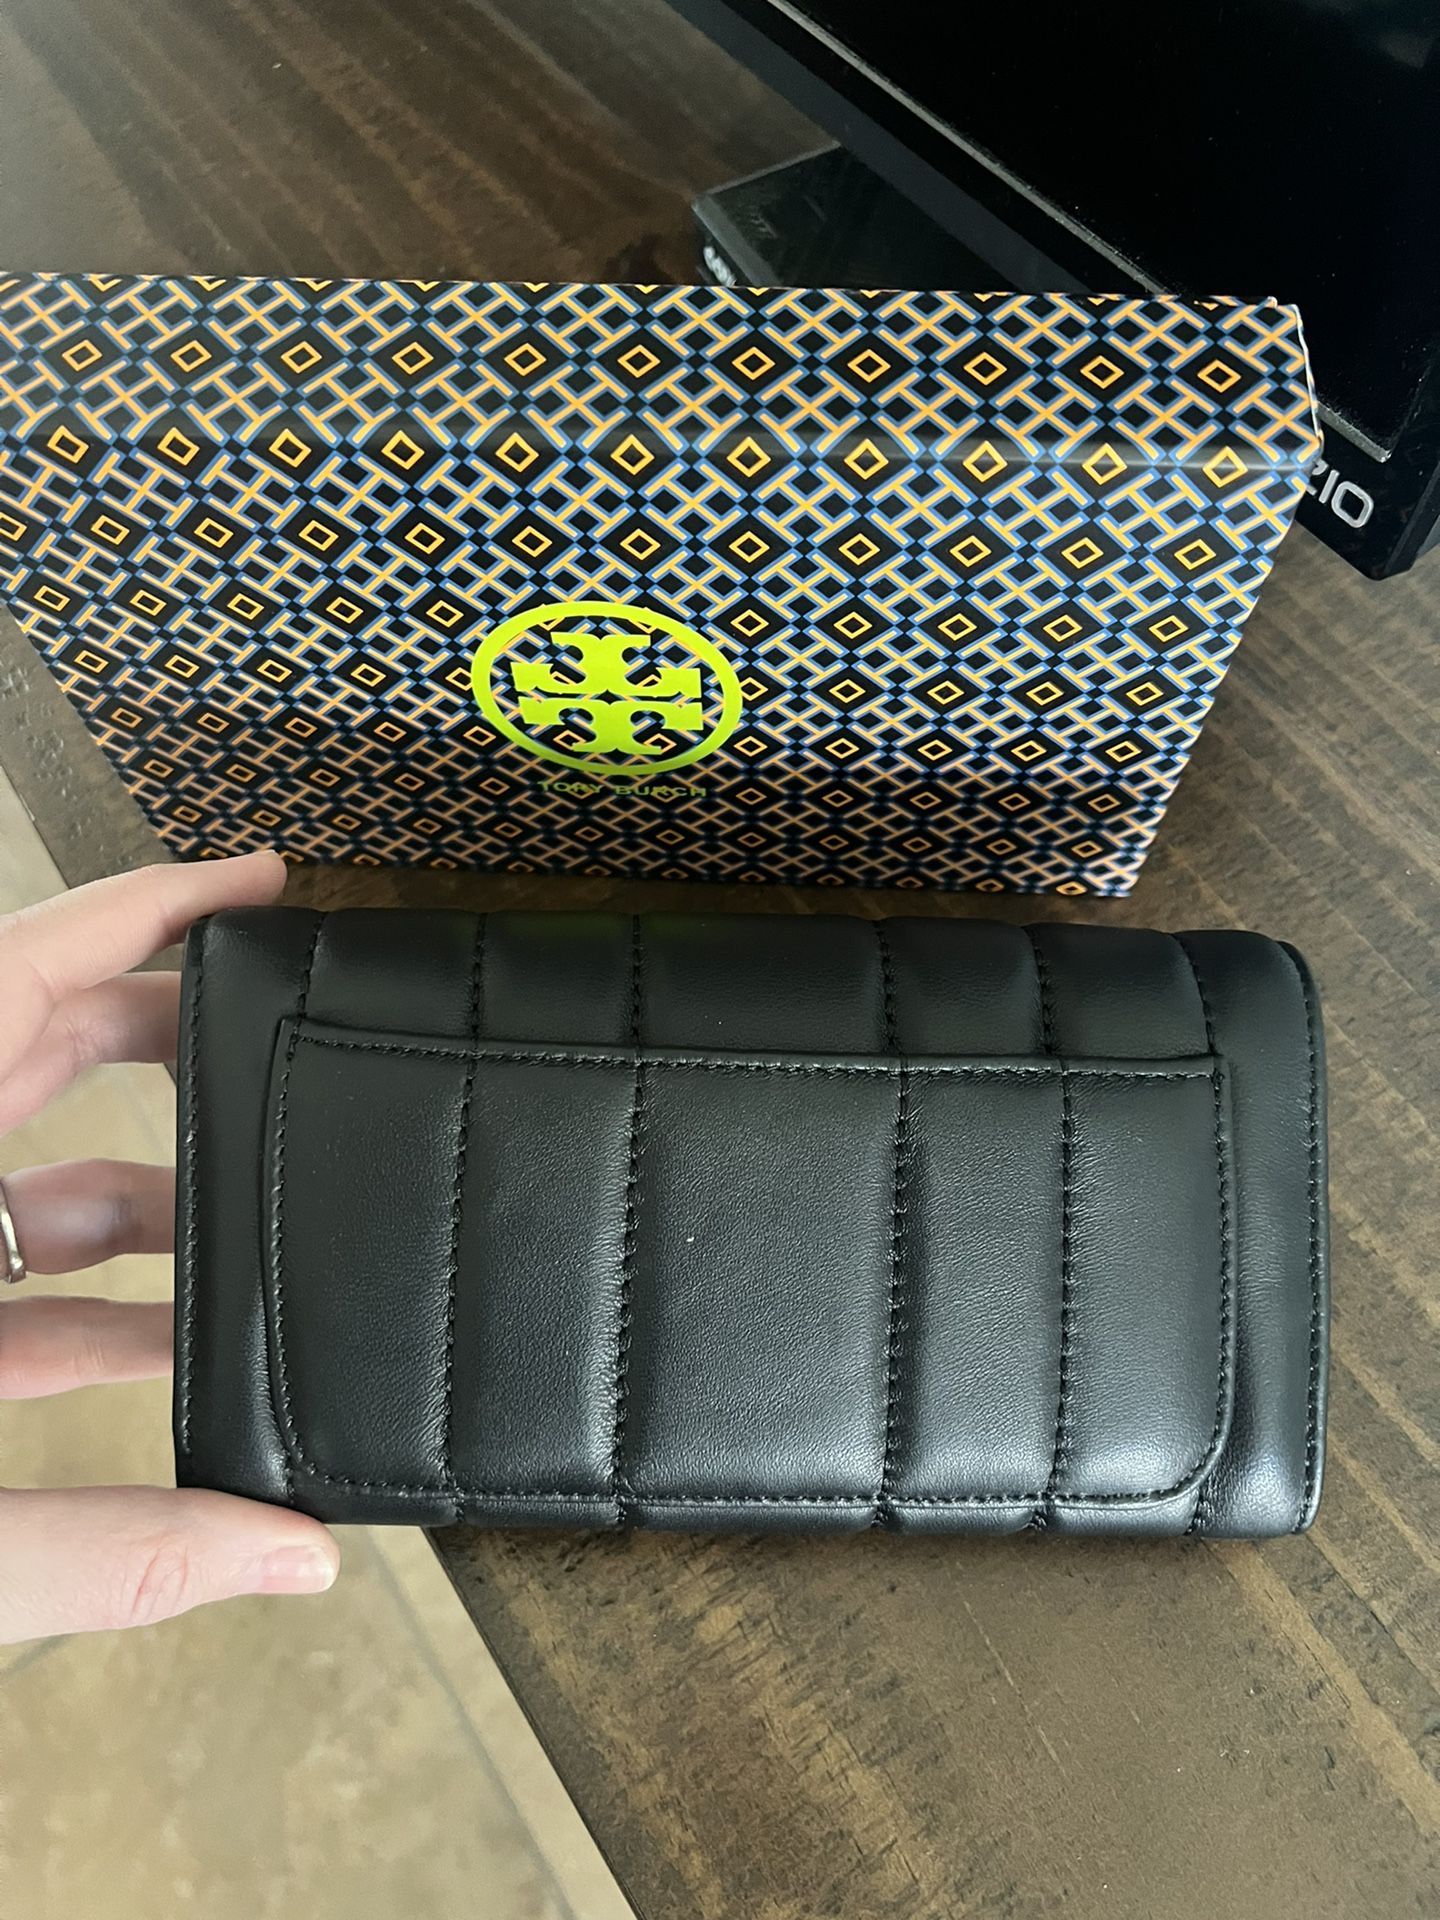 Tory Burch Emerson Wallet for Sale in Boerne, TX - OfferUp